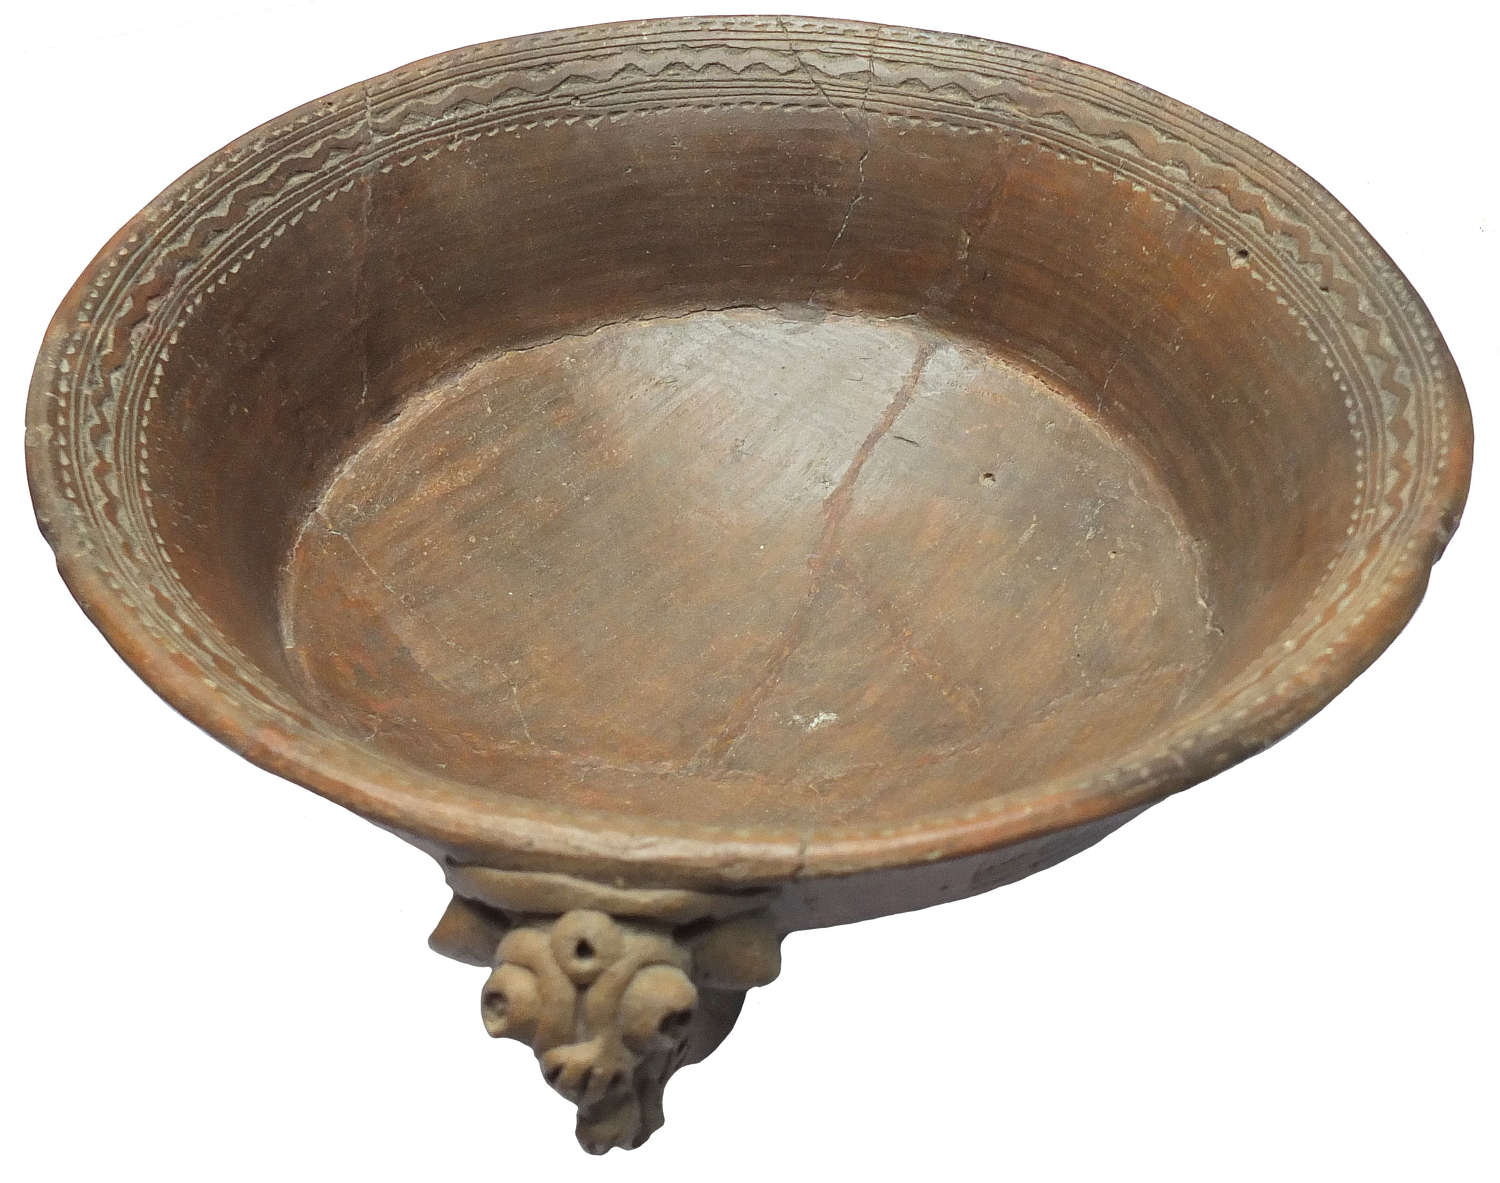 A large Costa Rican terracotta tripod bowl with zoomorphic figure